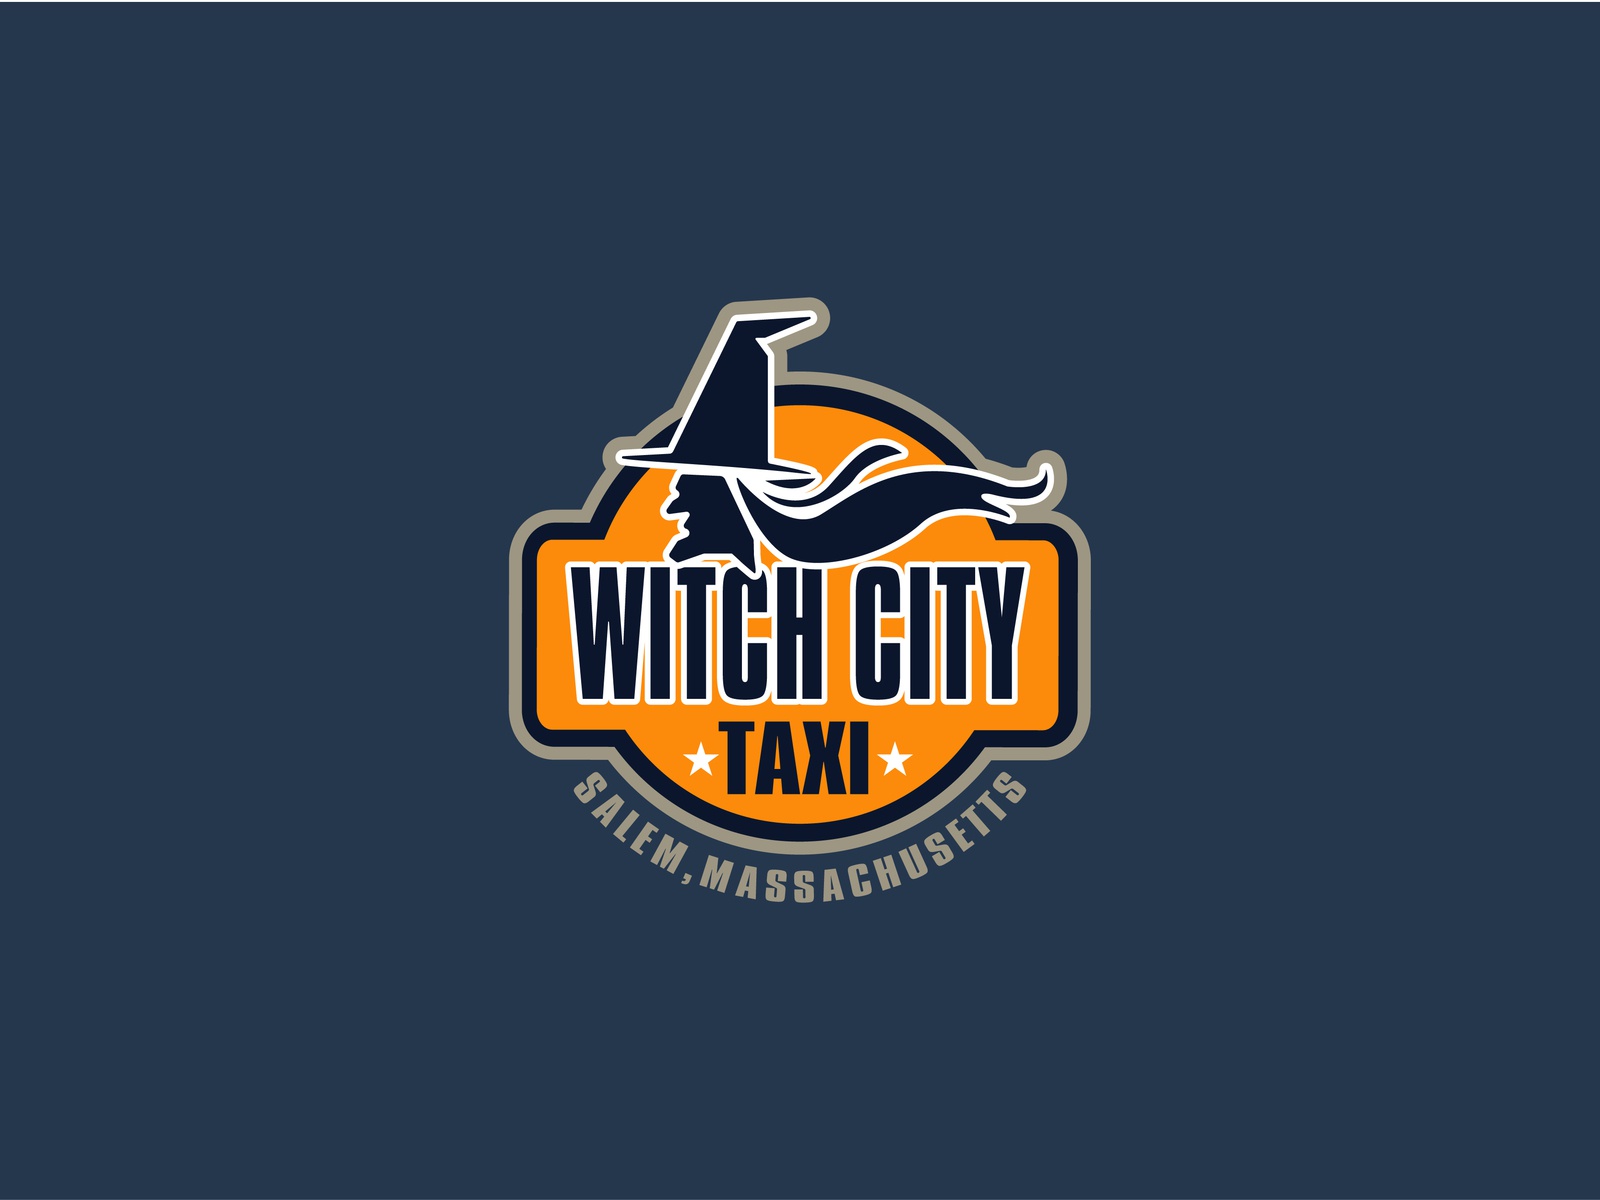 Company logo of WITCH CITY TAXI